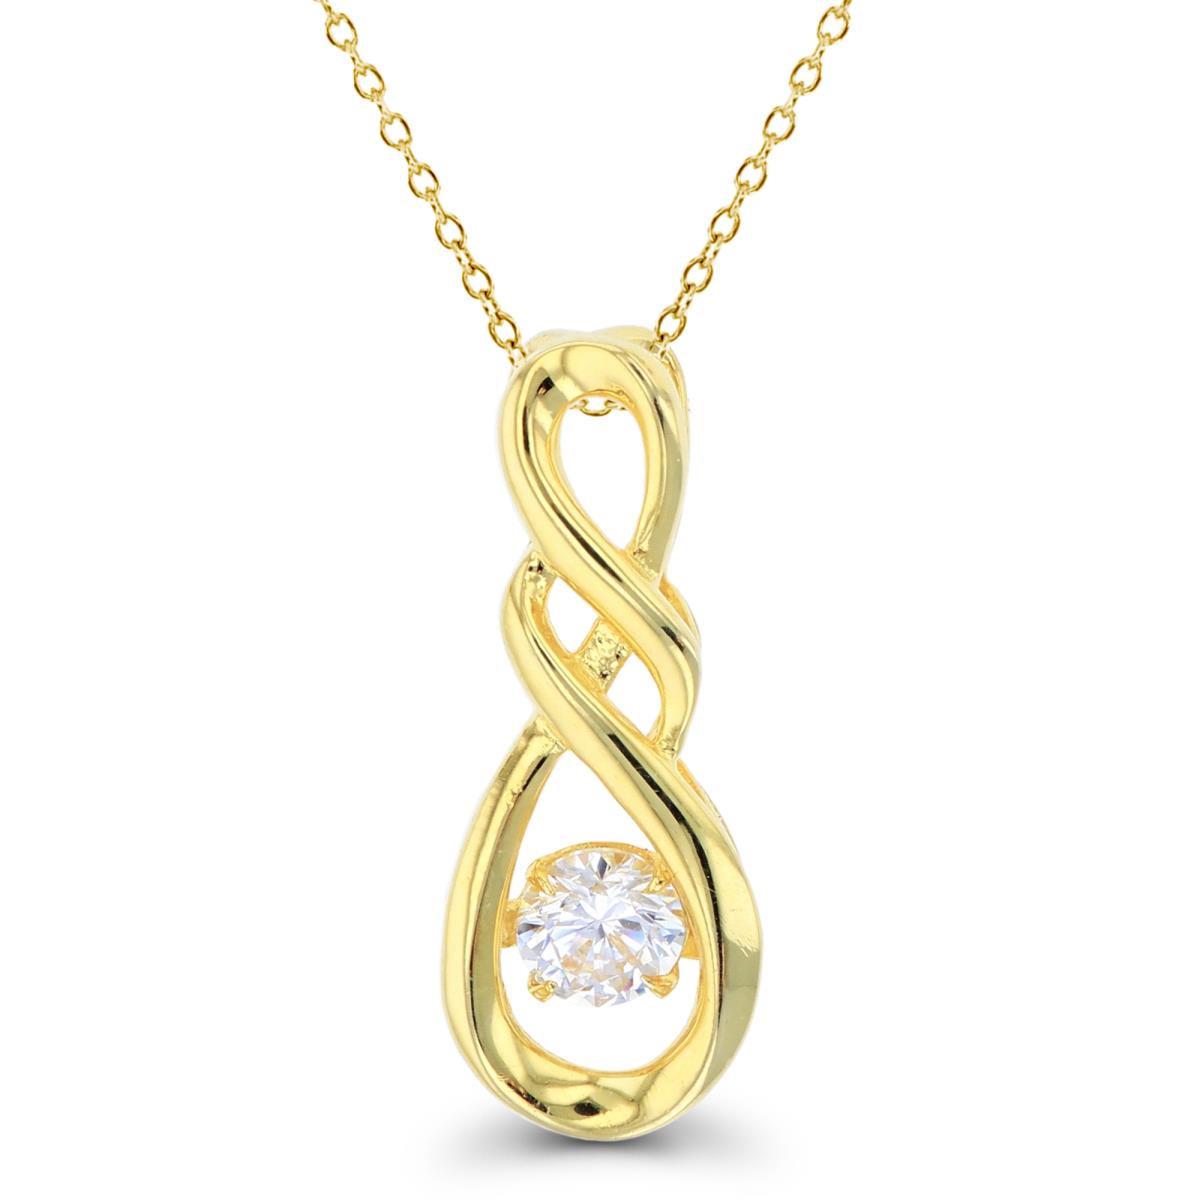 Sterling Silver+1Micron Yellow Gold 5mm Rnd White CZ Dancing in Vertical Infinity 18"Necklace